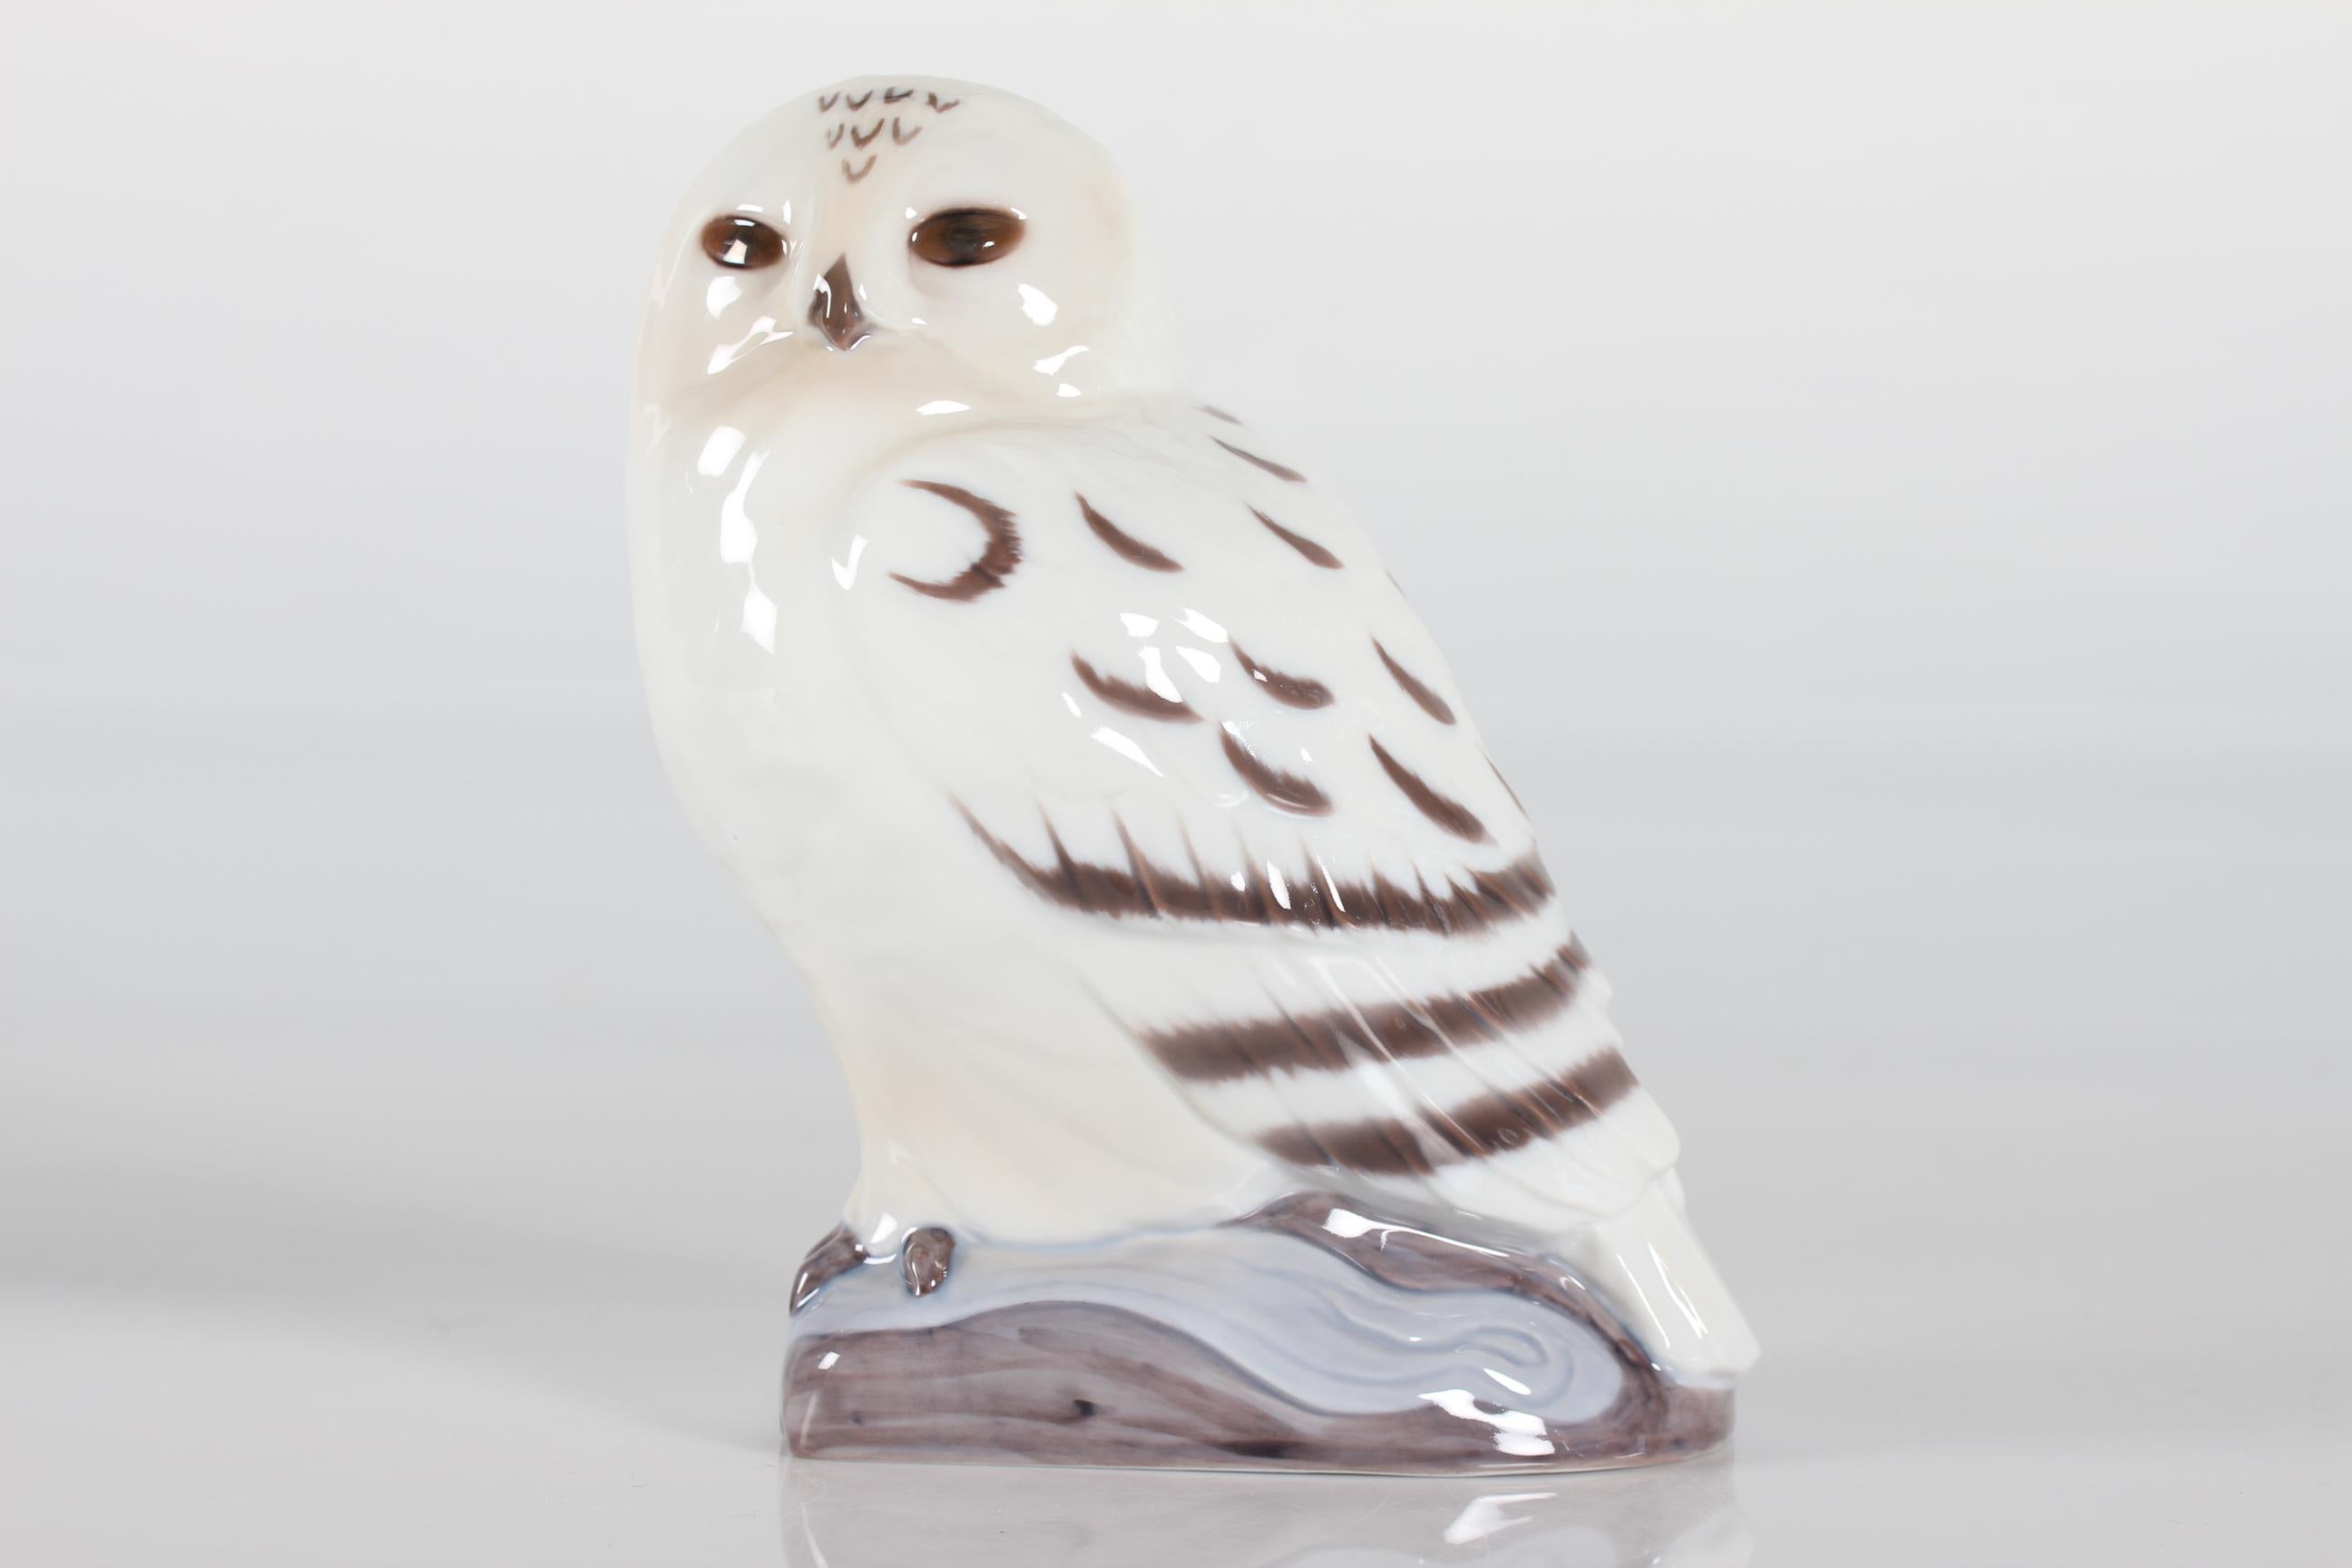 Vintage snow owl figure 2475 by Bing & Grøndahl later Royal Copenhagen in Denmark.
It's made of porcelain with white and brown glaze by Danish artist K. Otto in the 1970s.